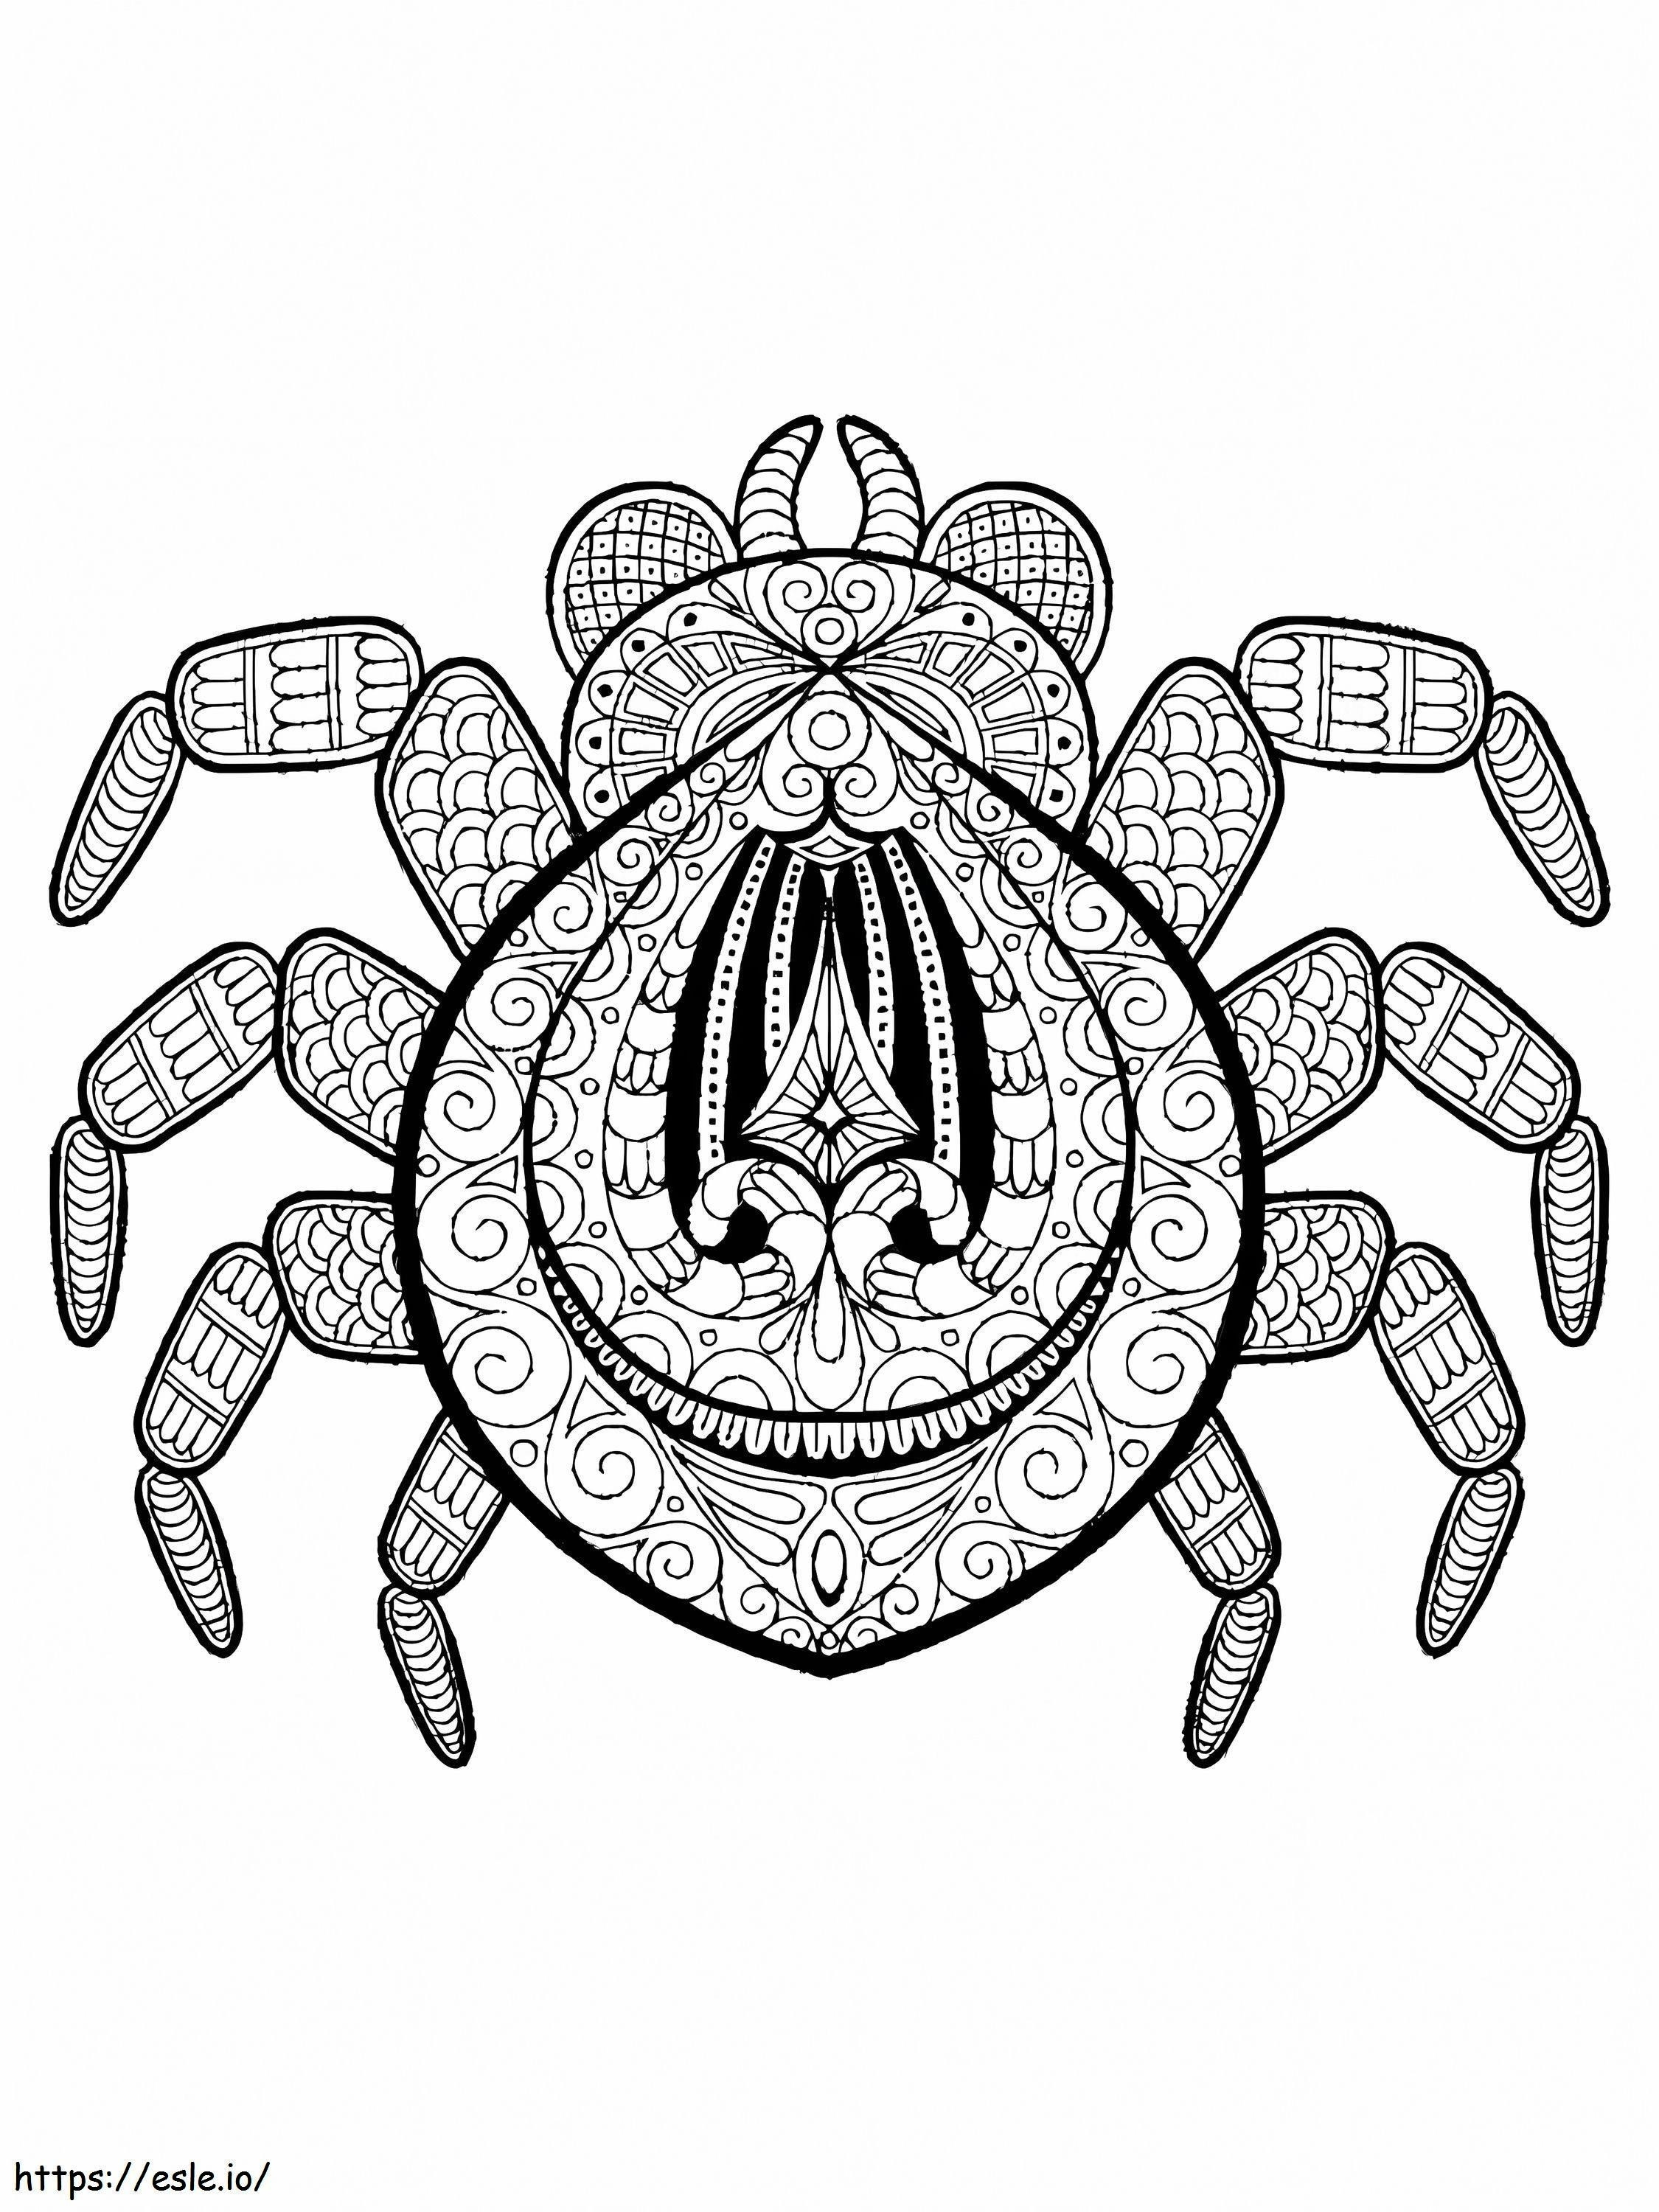 The Spider Is For Adults coloring page